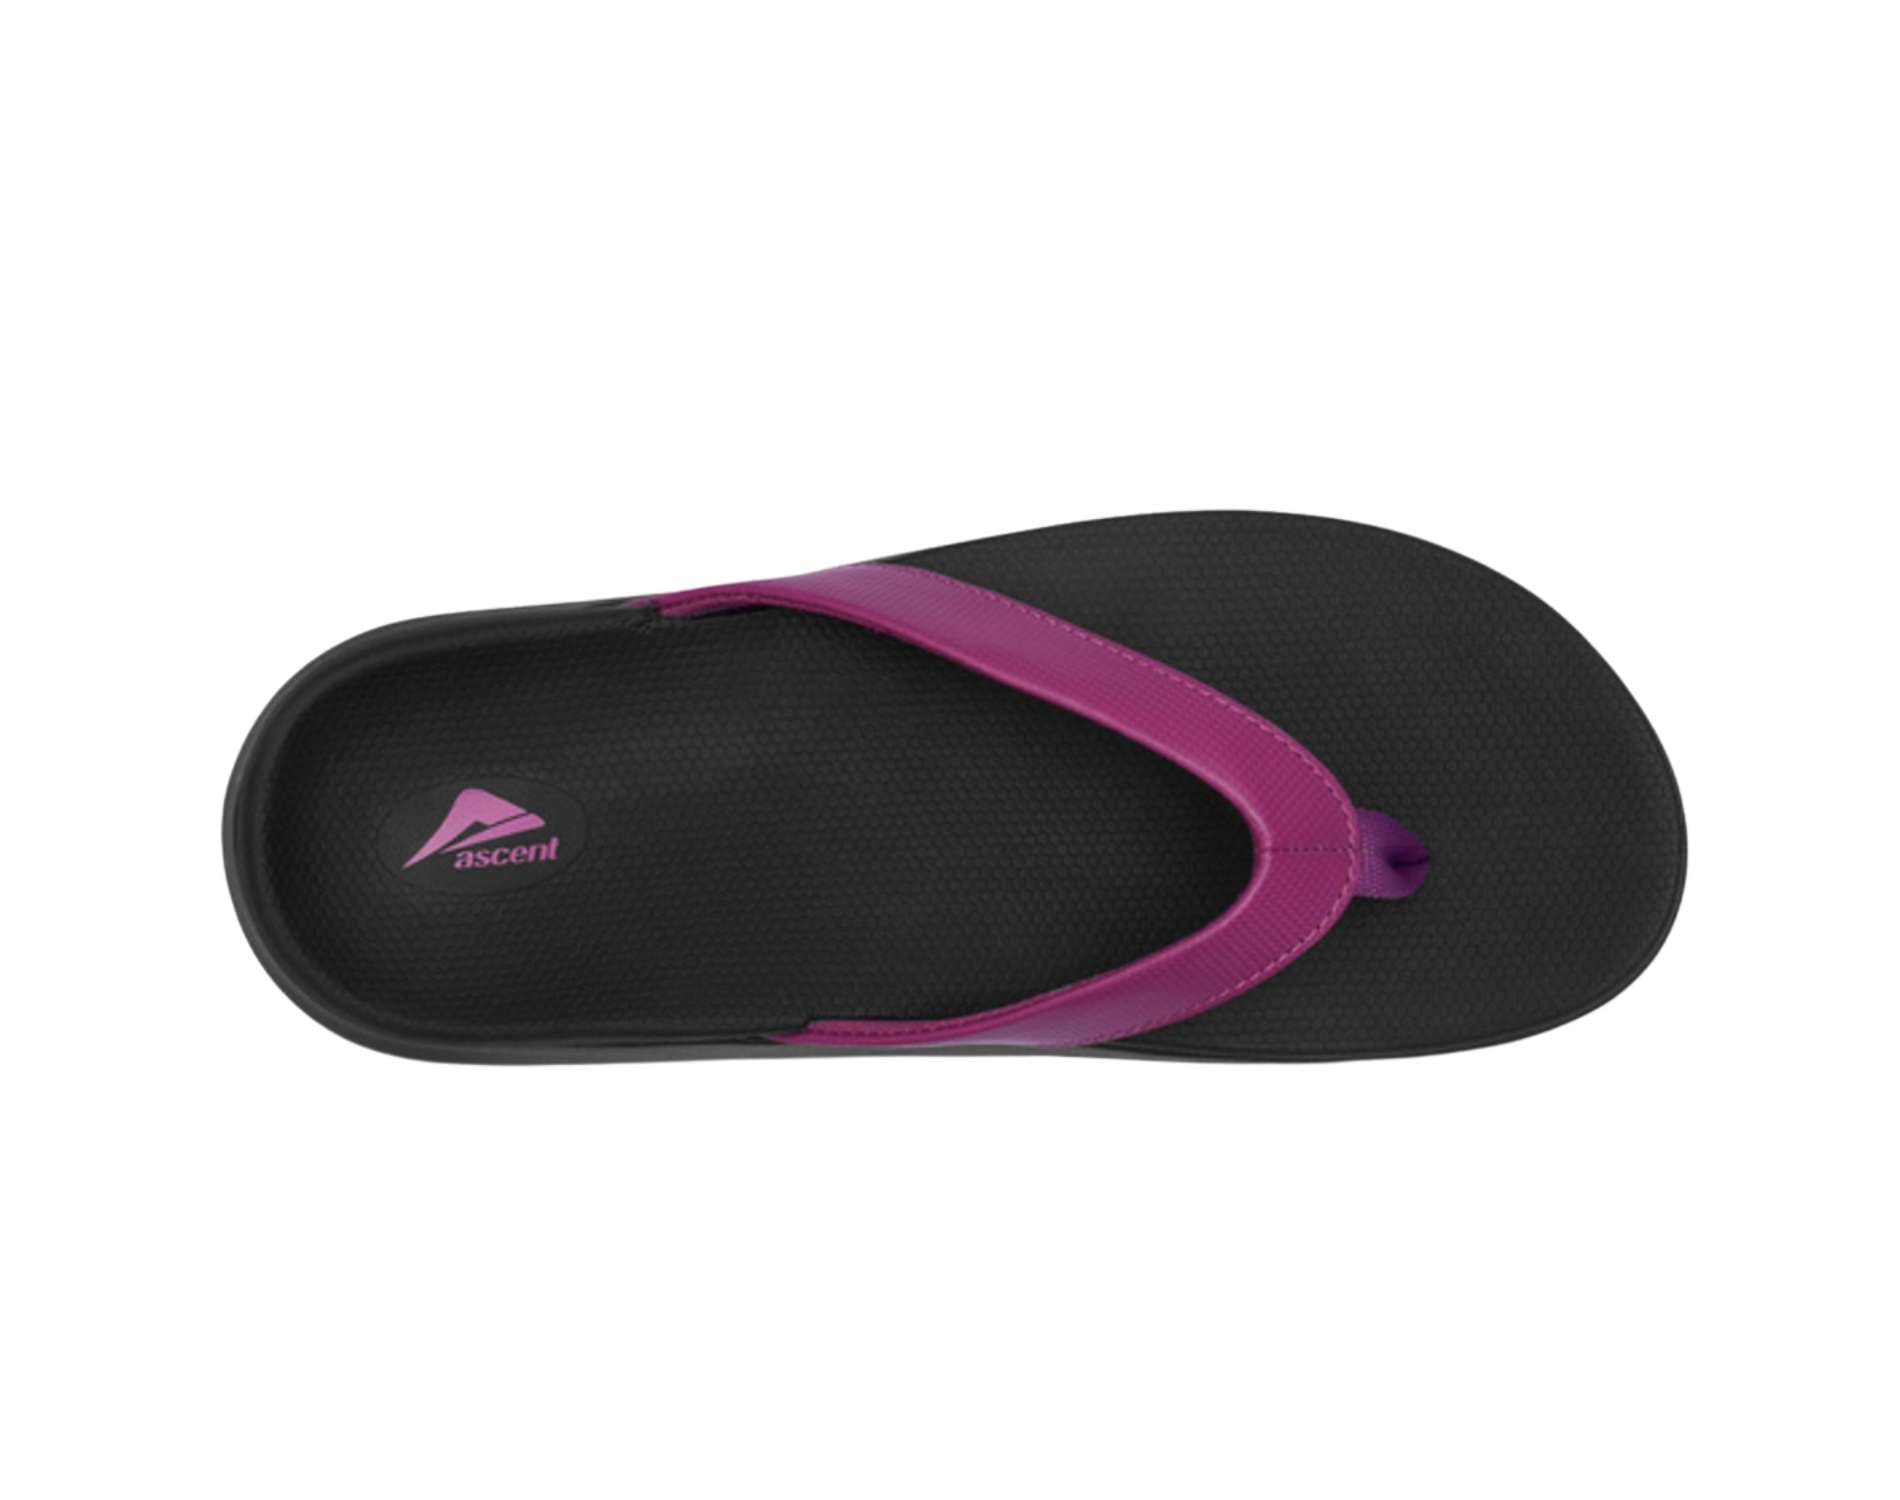 Ascent's Groove sandals for women in fuchsia colour